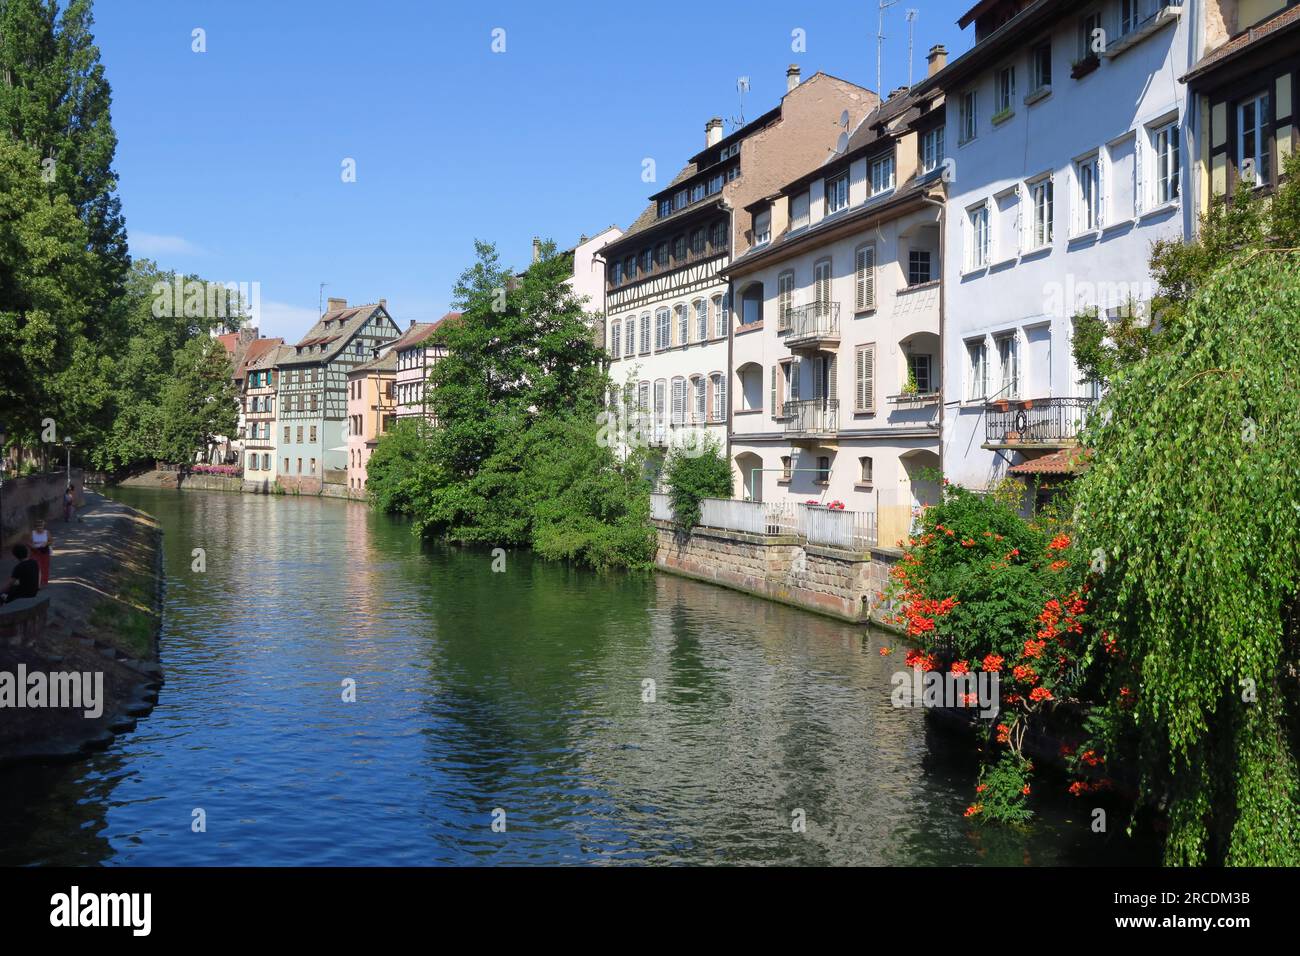 Waterfront buildings in the area known as Petite France in the French town of Strasbourg which lies on the River Rhine Stock Photo